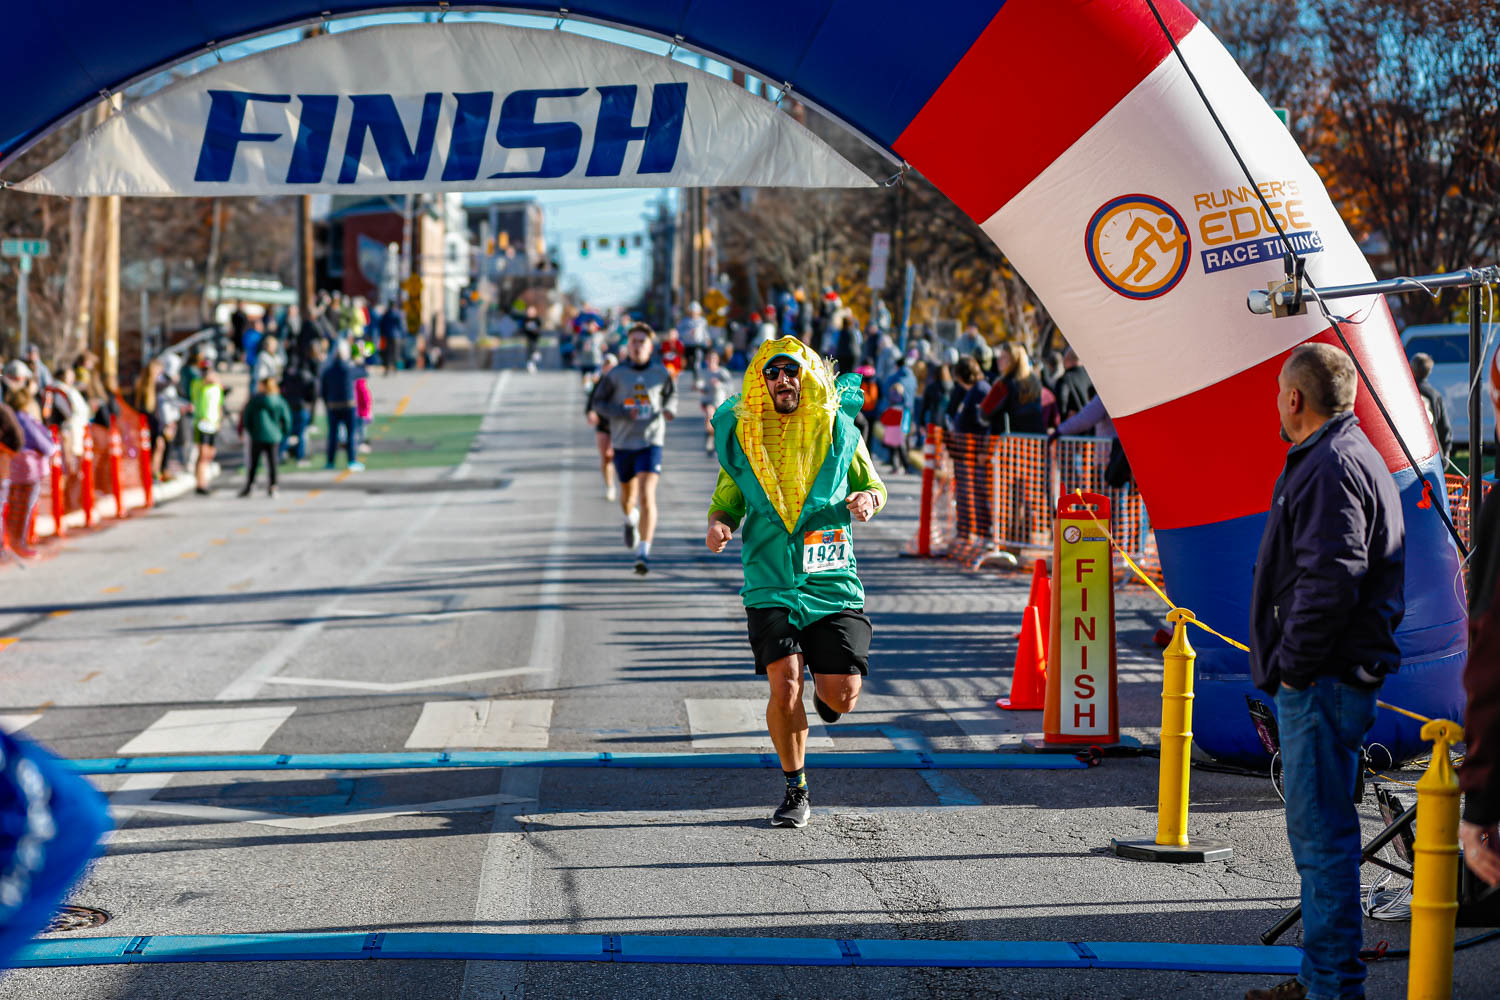 Crossing the finish line in my corn costume at the Turkey Trot